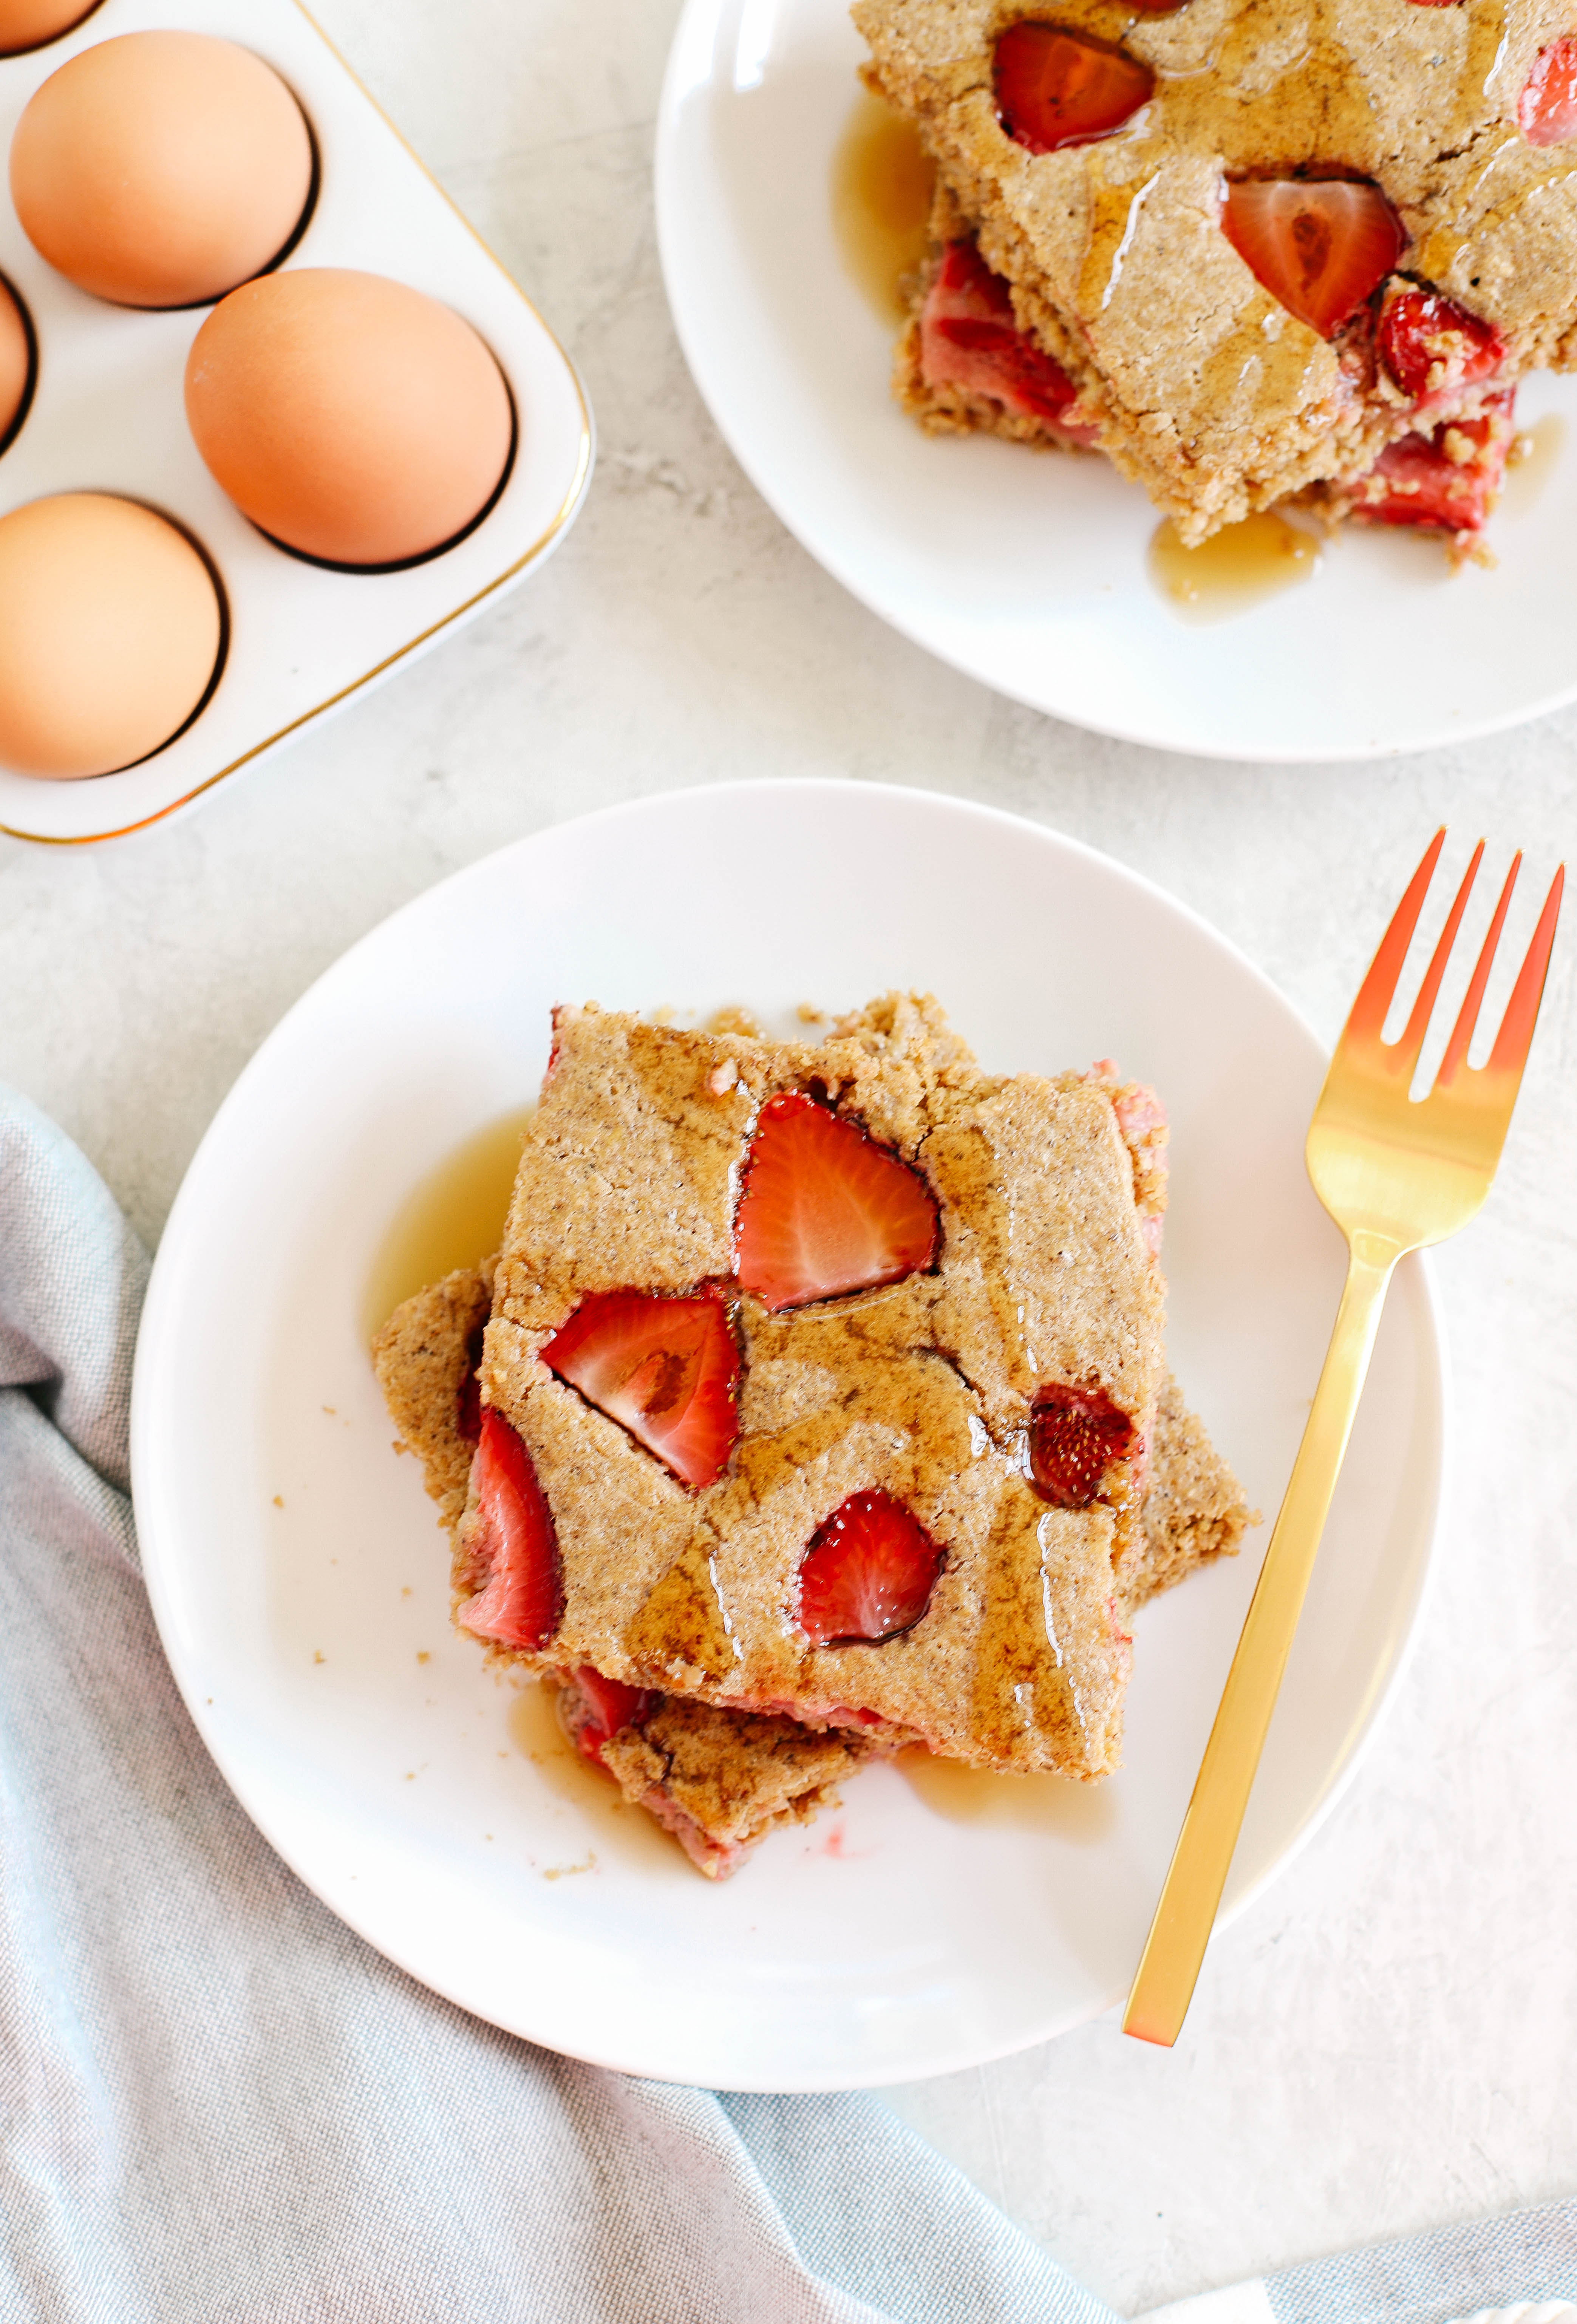 These quick and easy Sheet Pan Strawberry Pancakes are the best way to make a bunch of pancakes all at once and are ready in just 15 minutes!  Gluten free and perfect for a crowd!